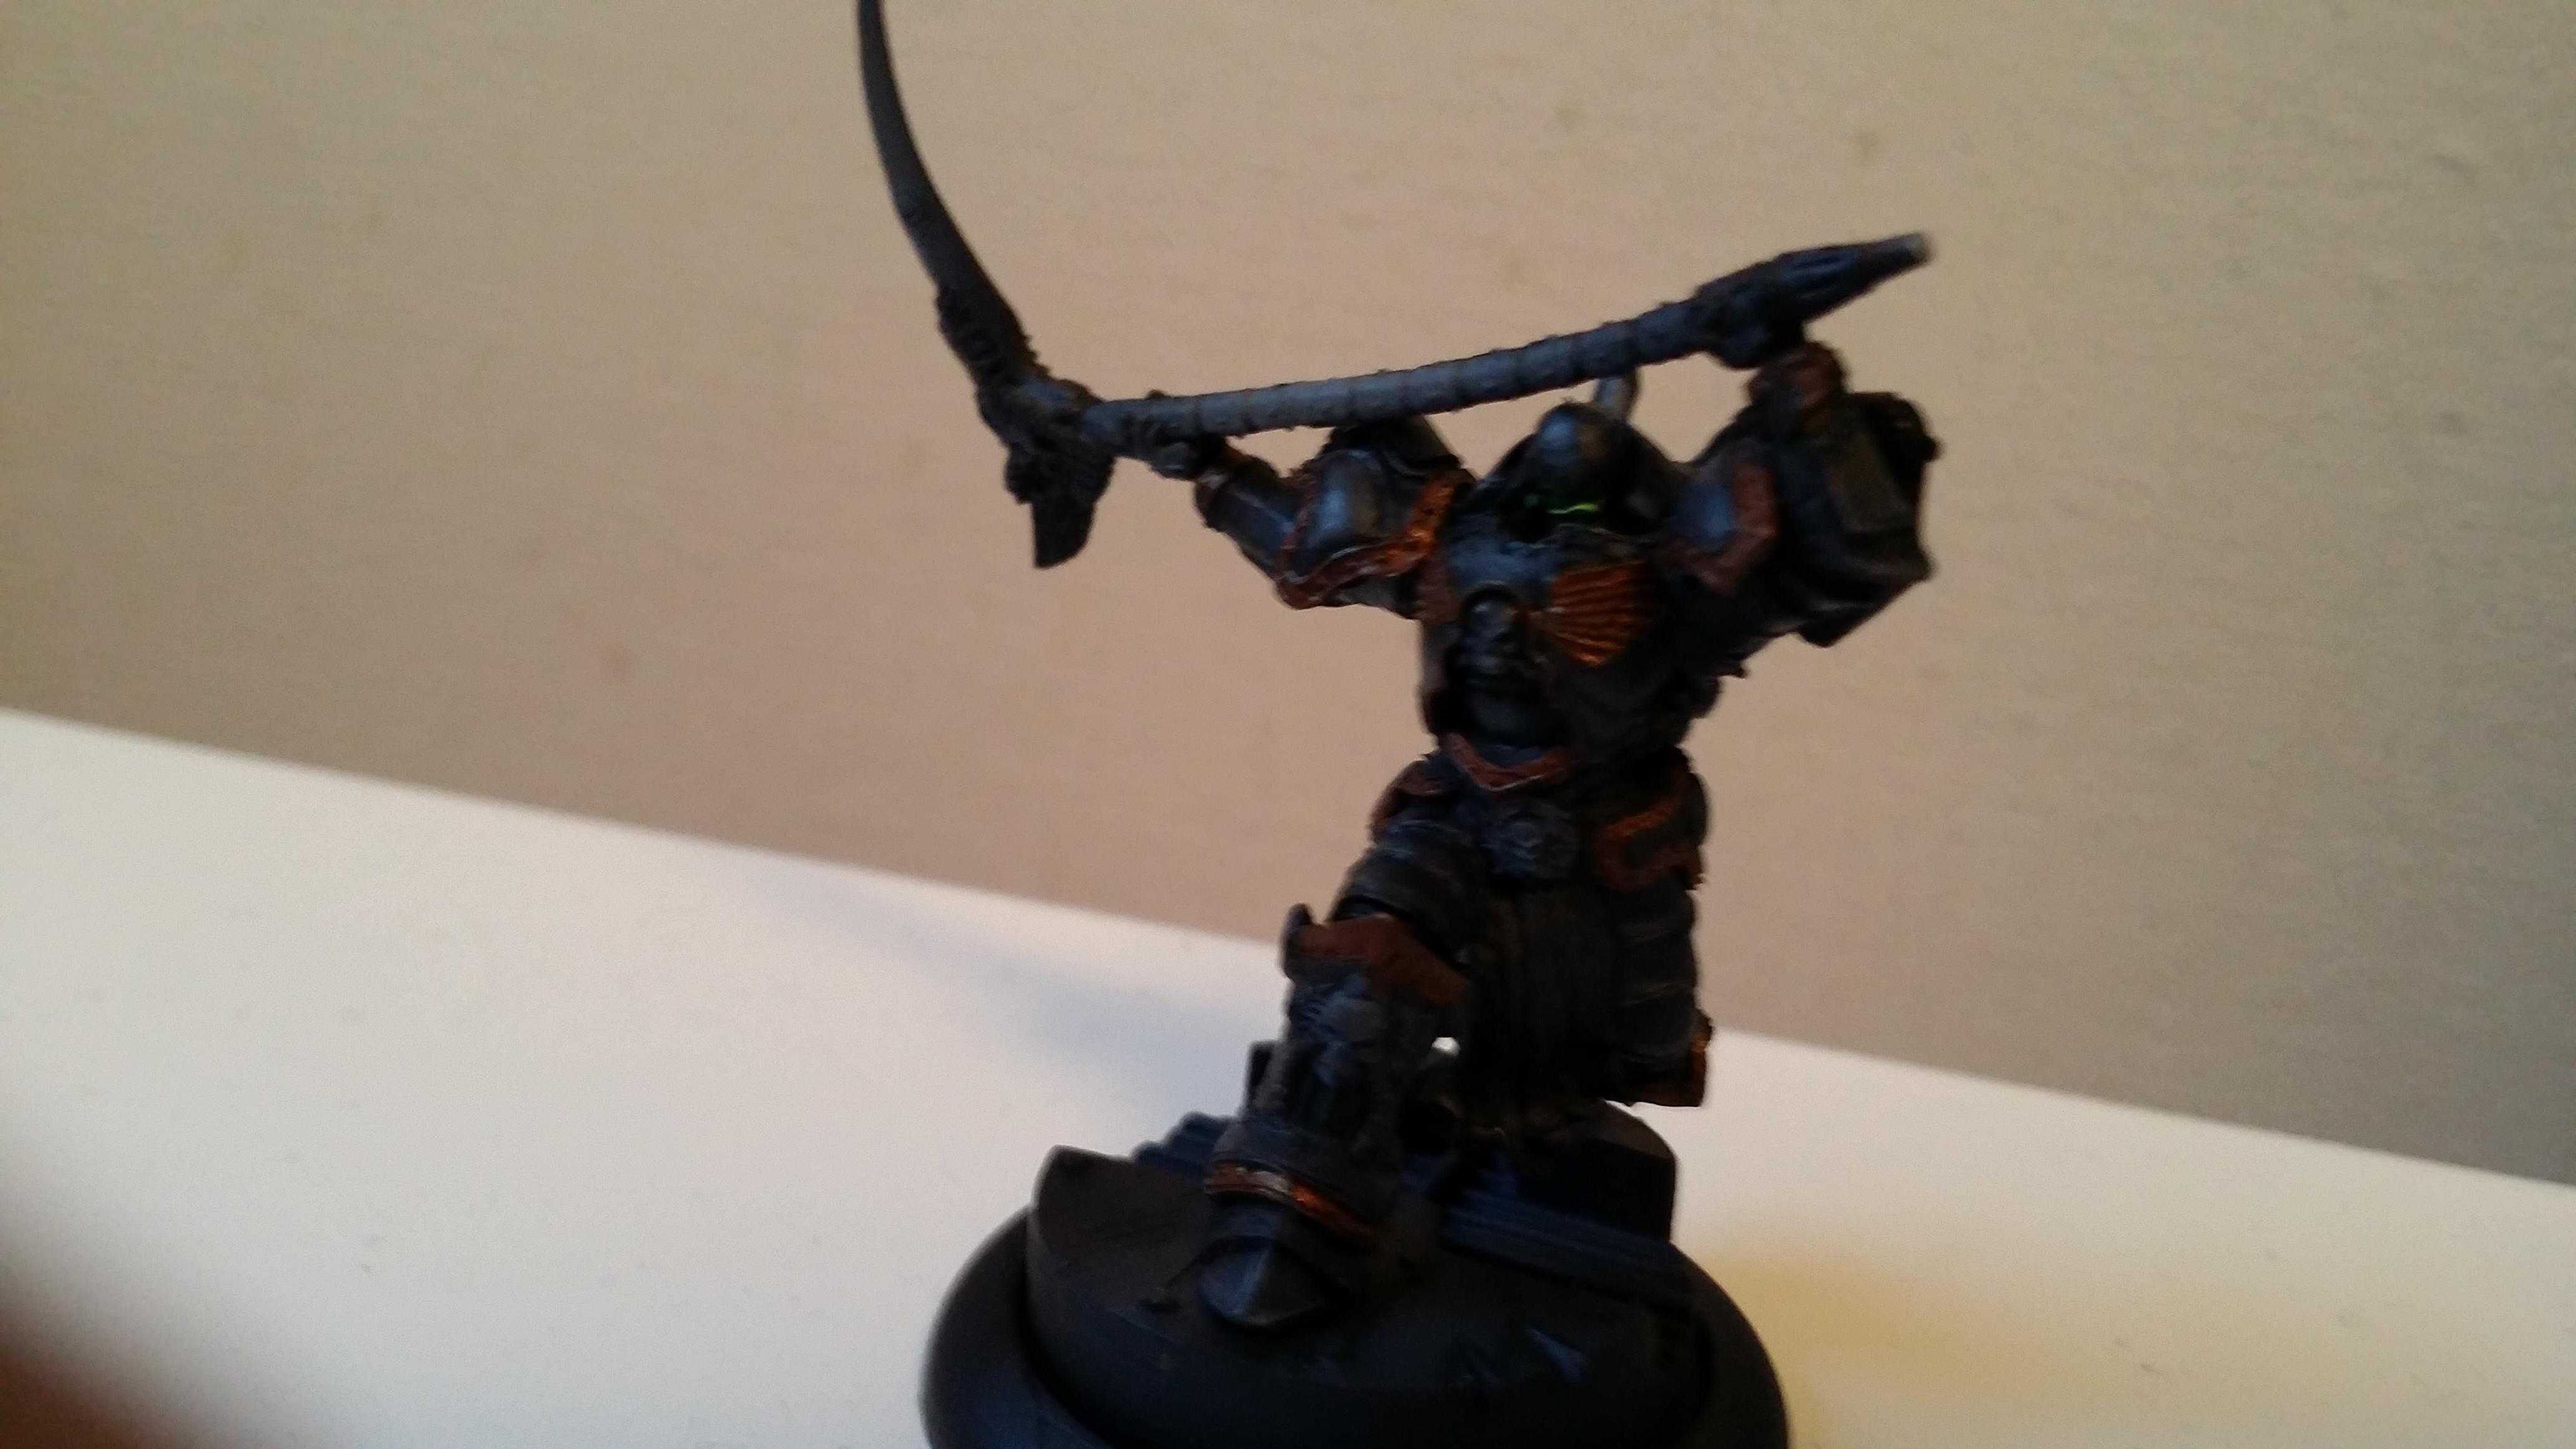 Steam Knight Base coated + Pre Highlighted, It was in bad light so the dark armor doesn't show